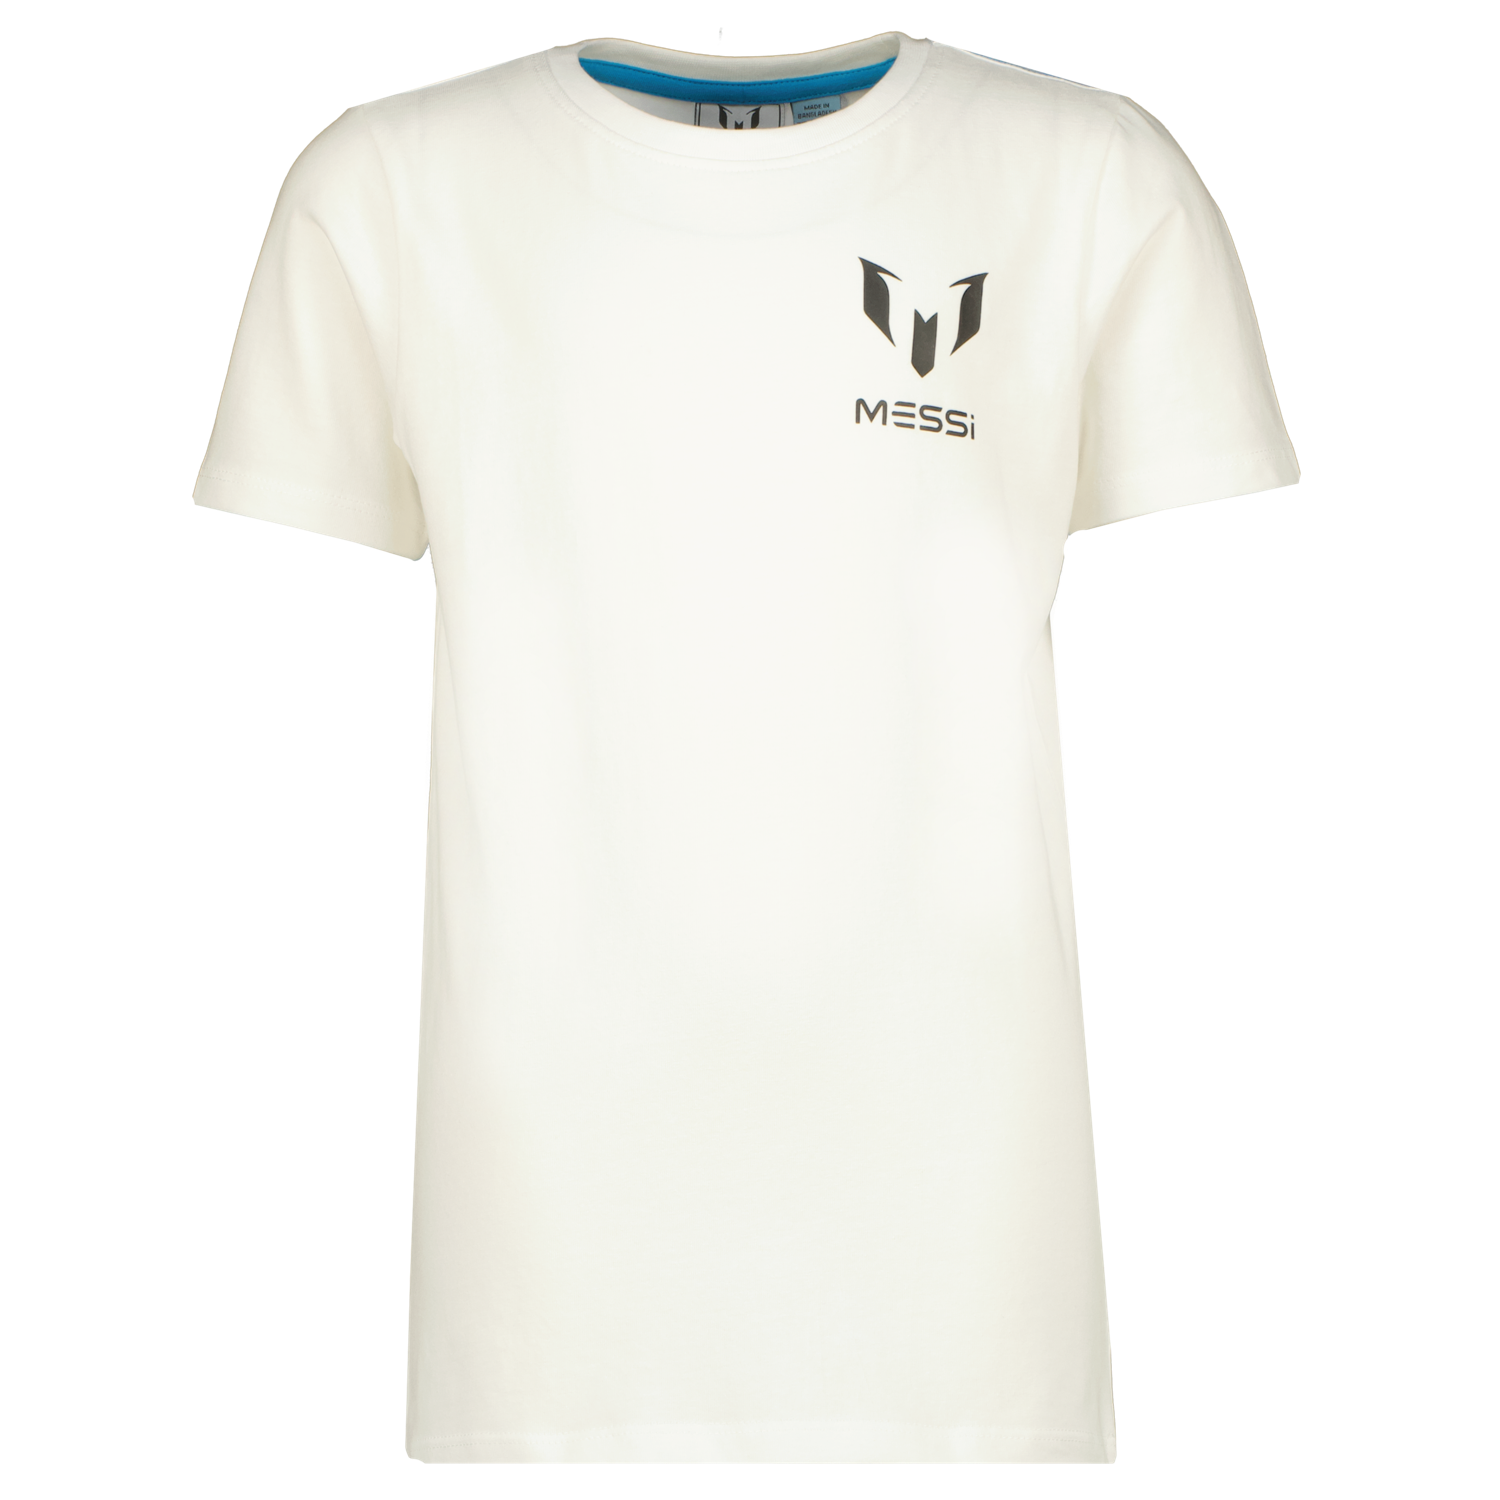 VN9171 T-Shirt Hionel